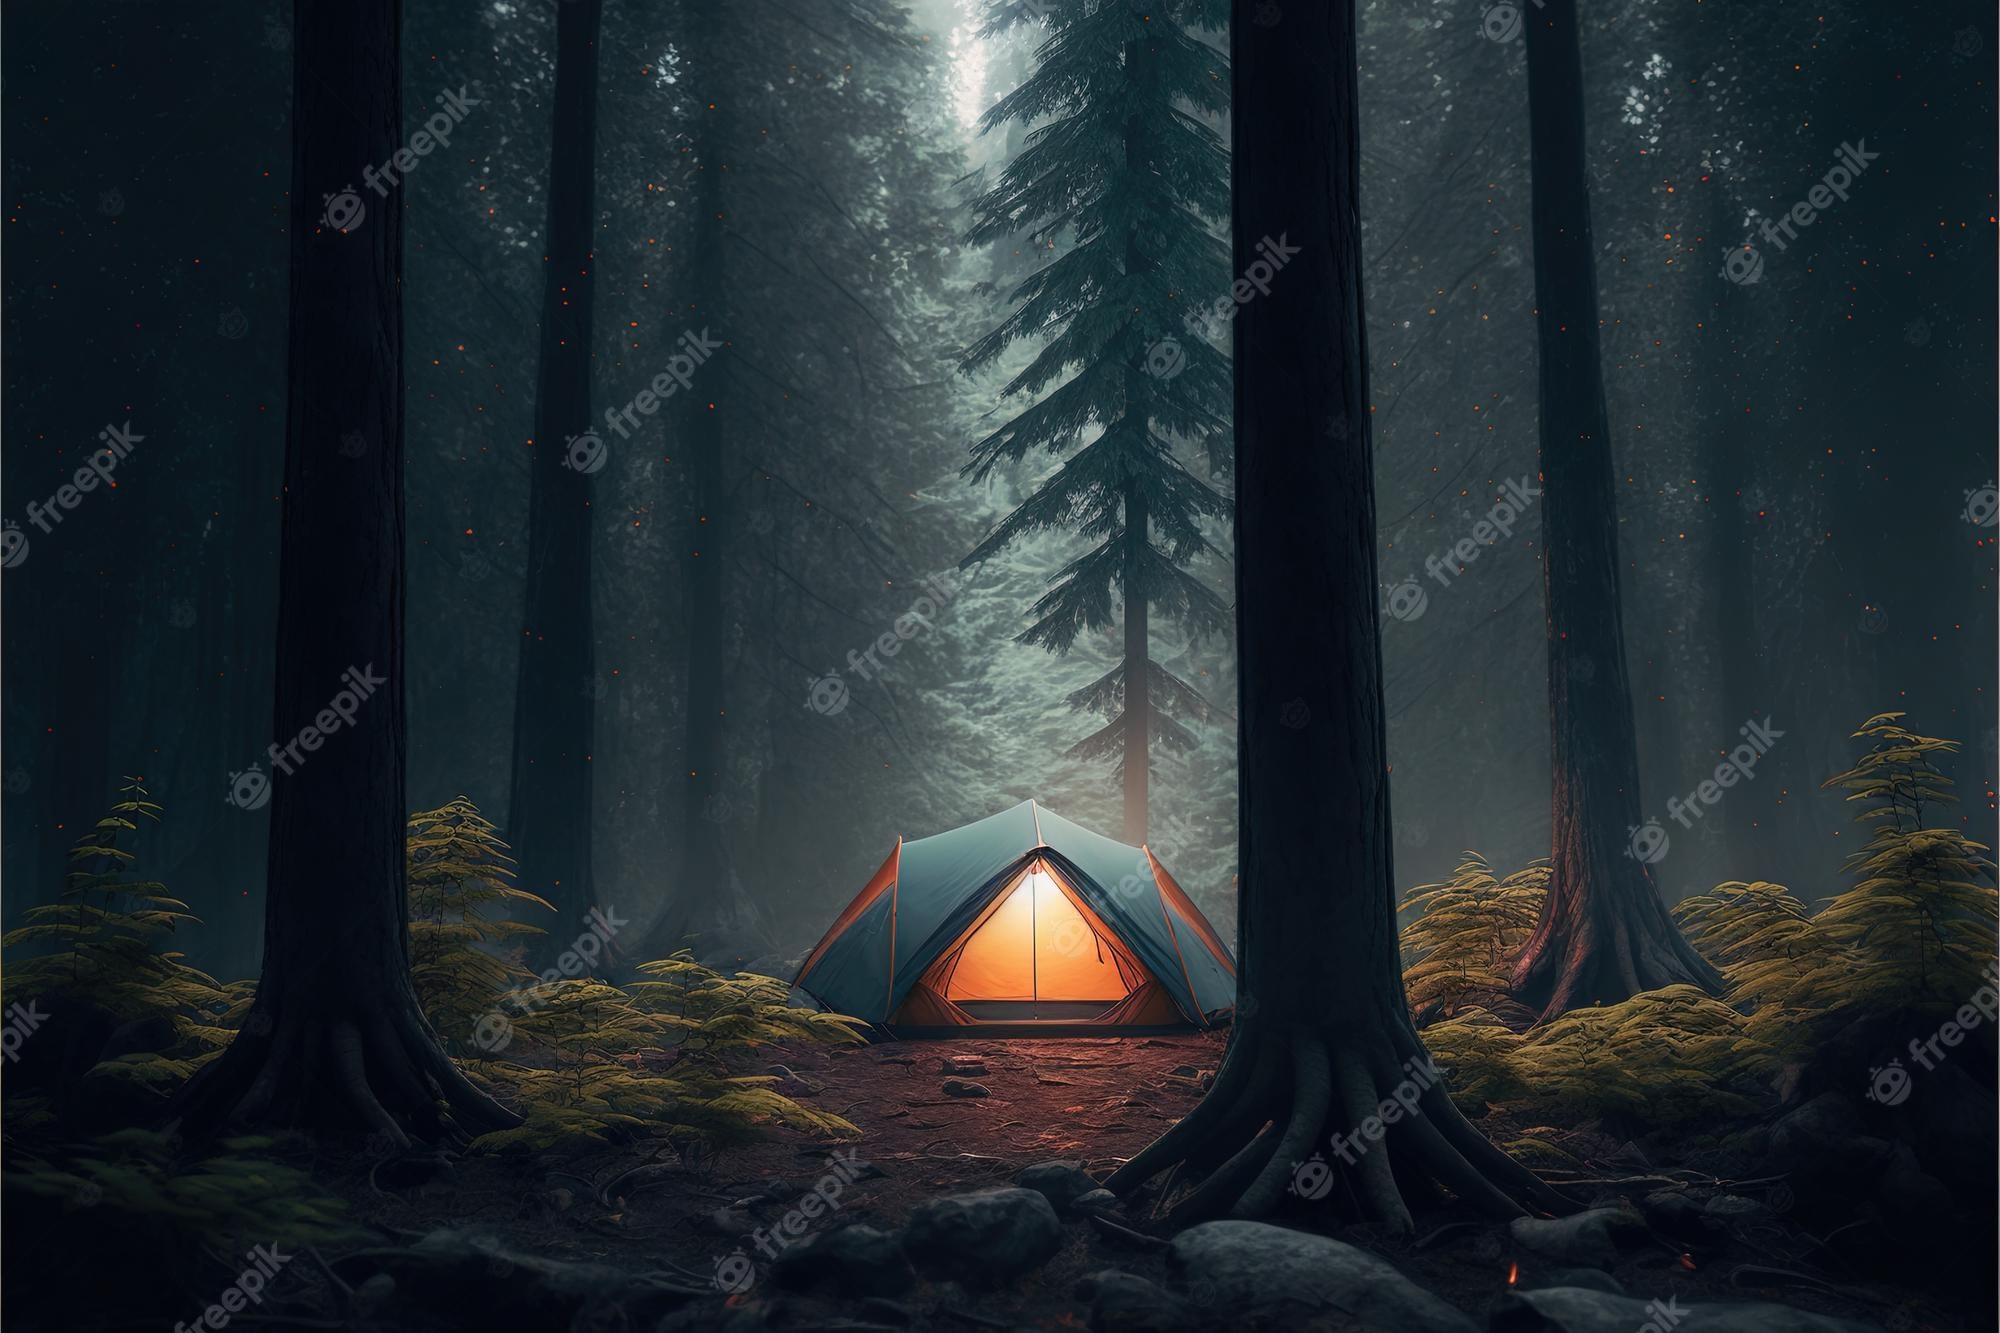 Tent in the forest at night - Camping